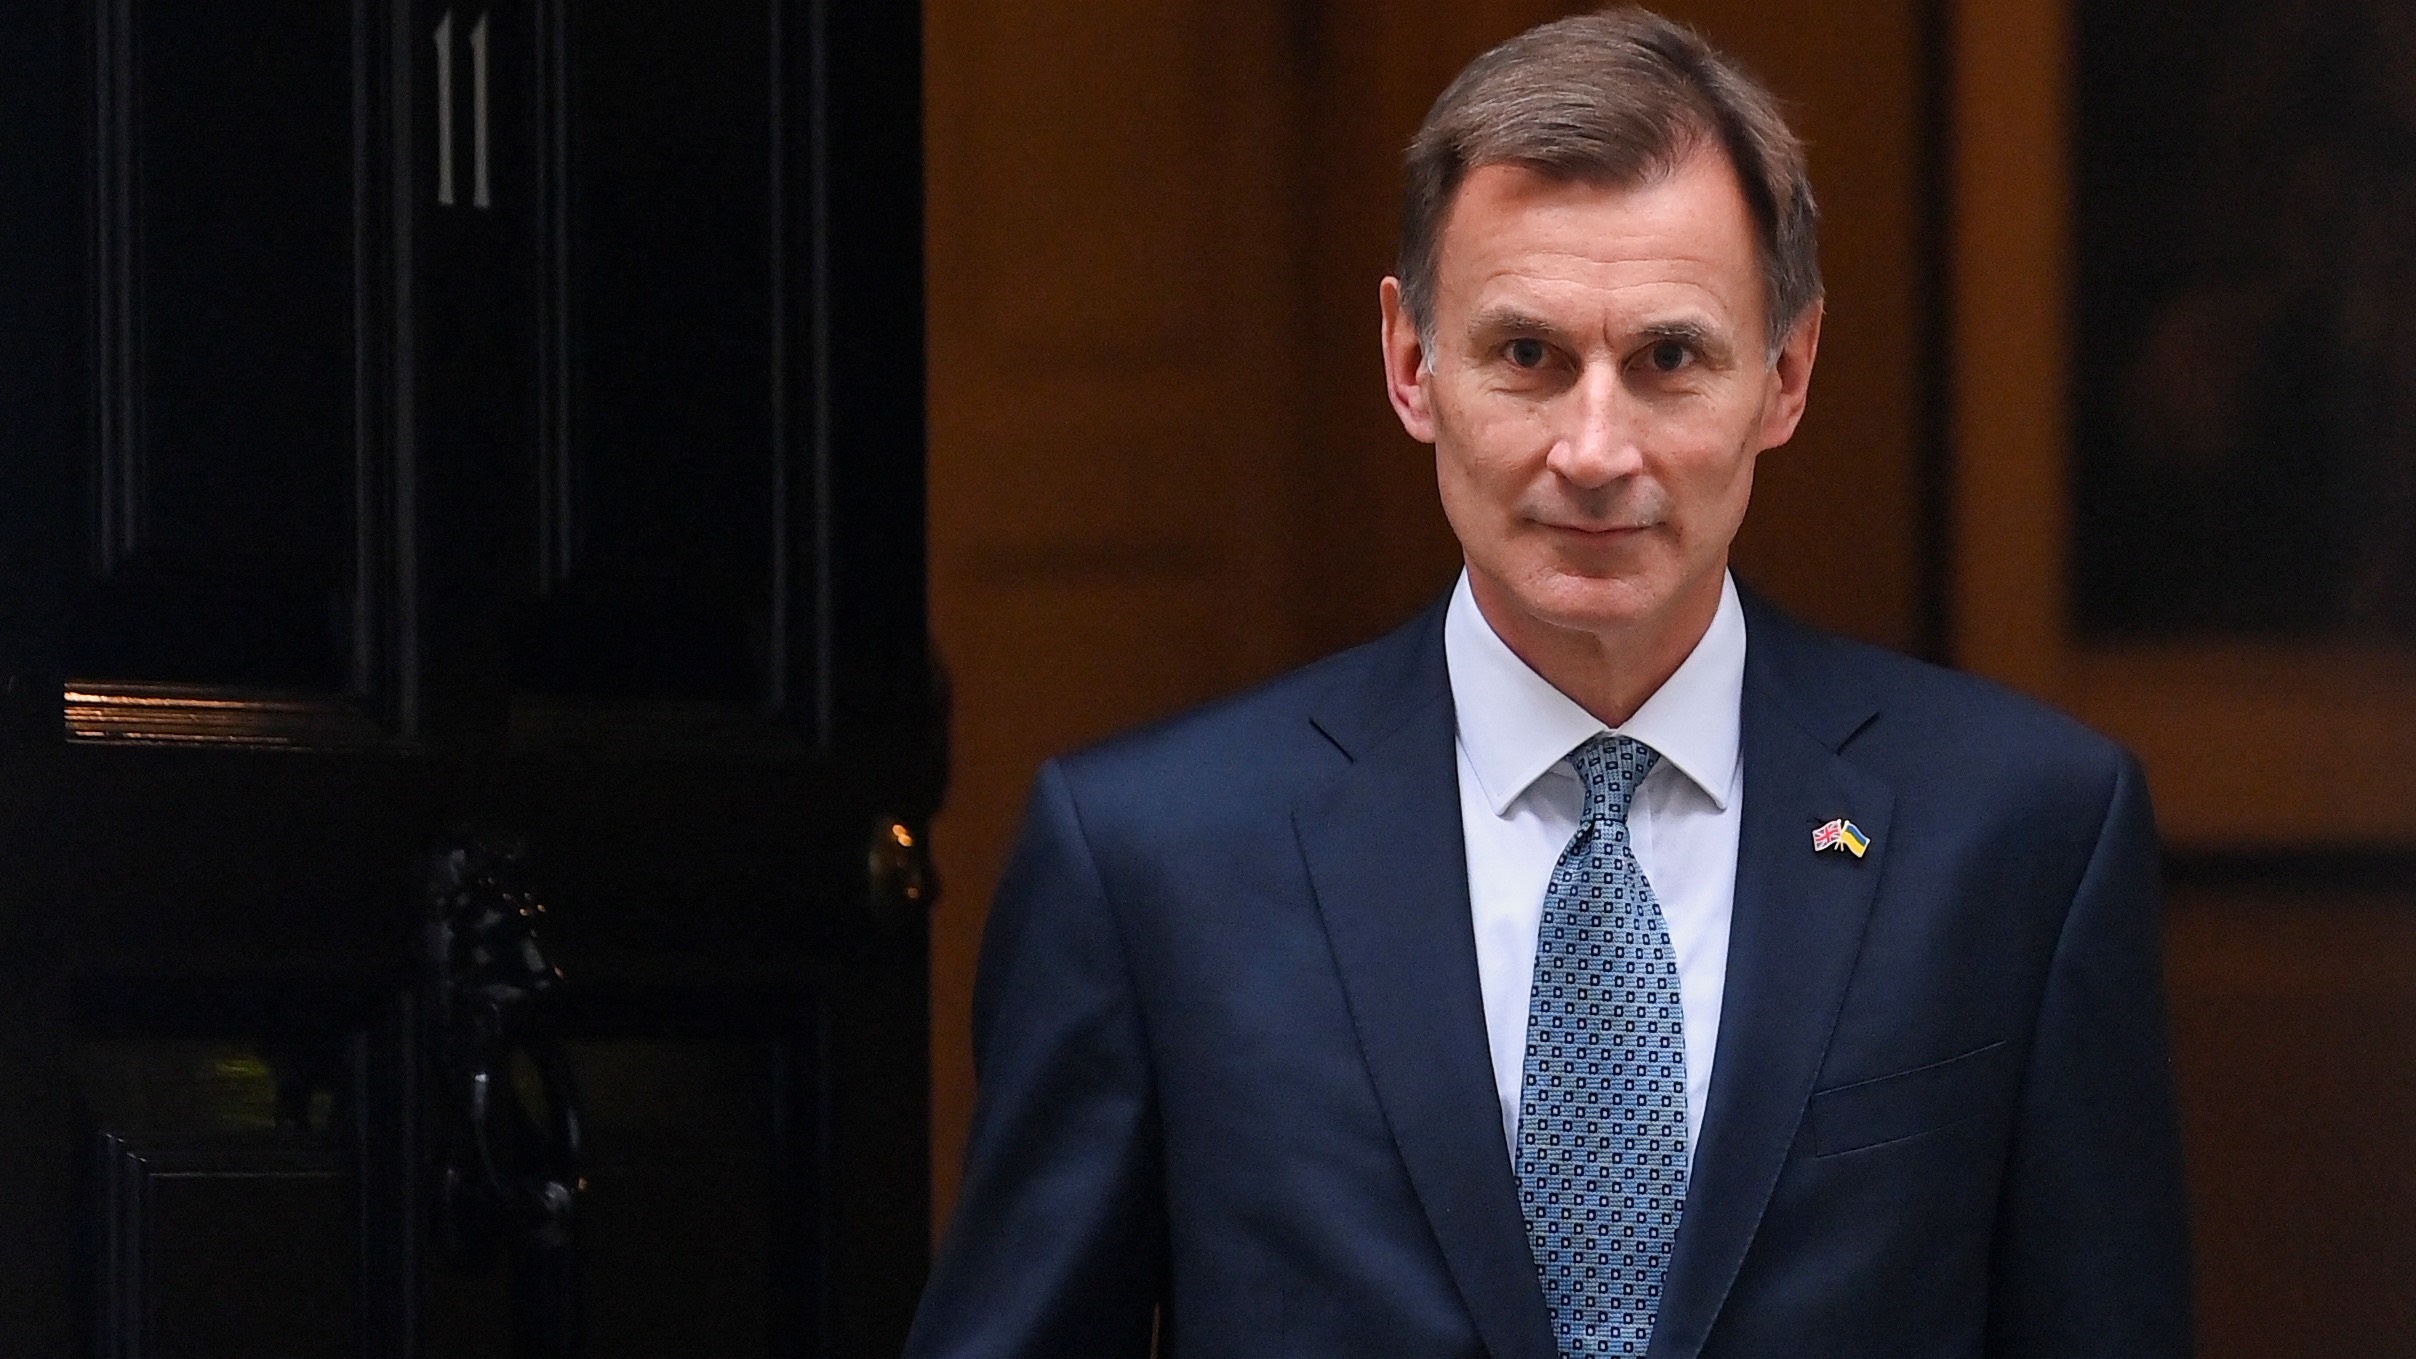 The UK's Chancellor of the Exchequer Jeremy Hunt outside Downing Street in London. /Toby Melville/Reuters